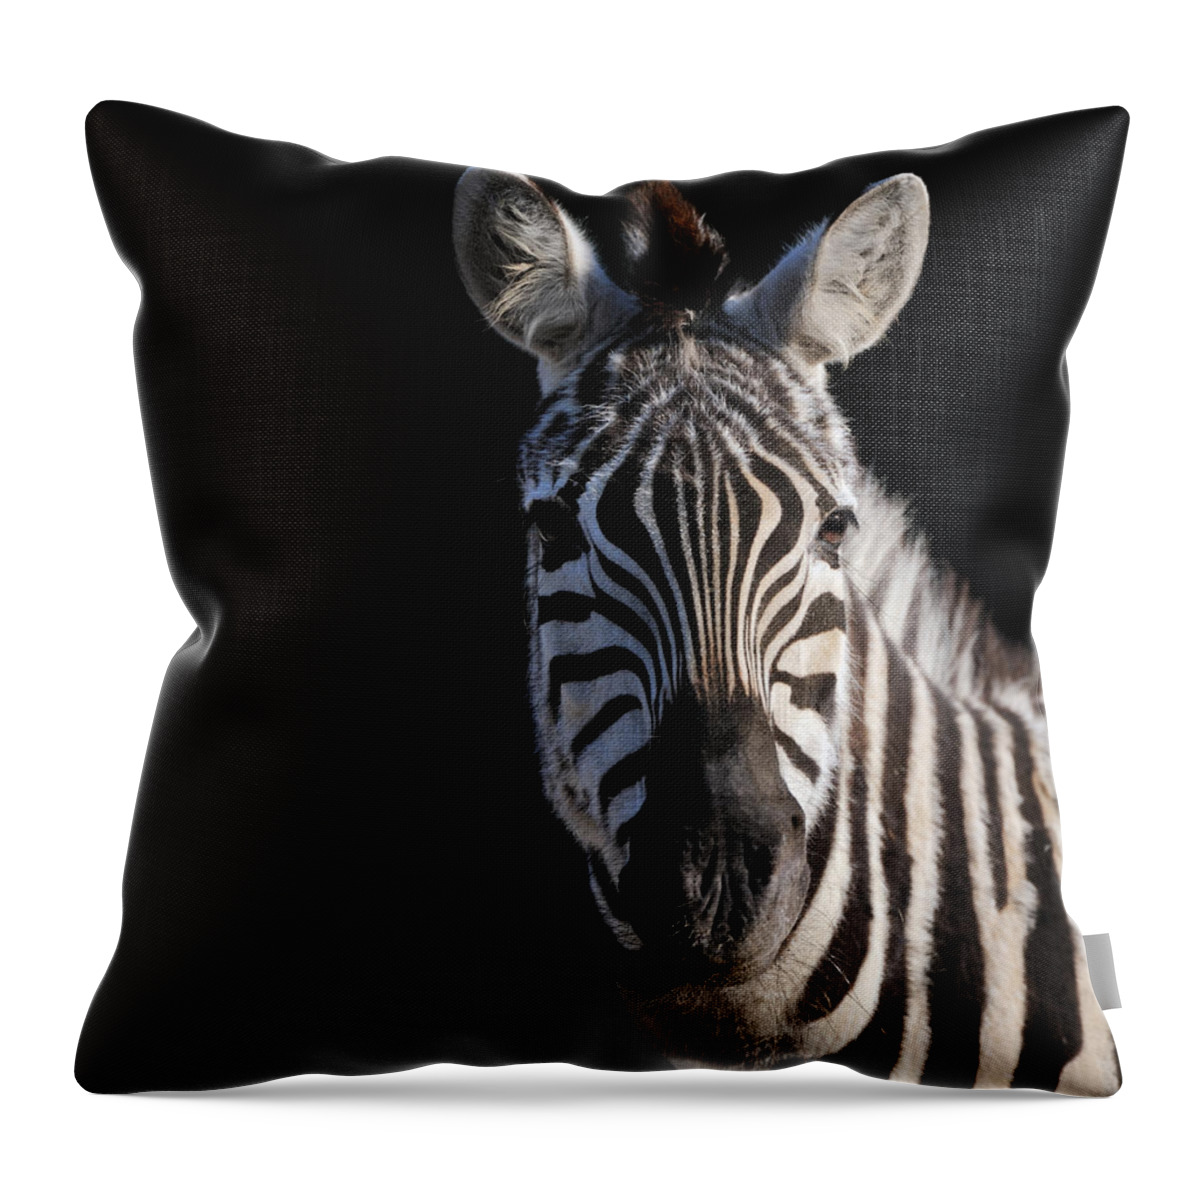 Vertebrate Throw Pillow featuring the photograph Zebra Isolated On Black Xxl by Freder